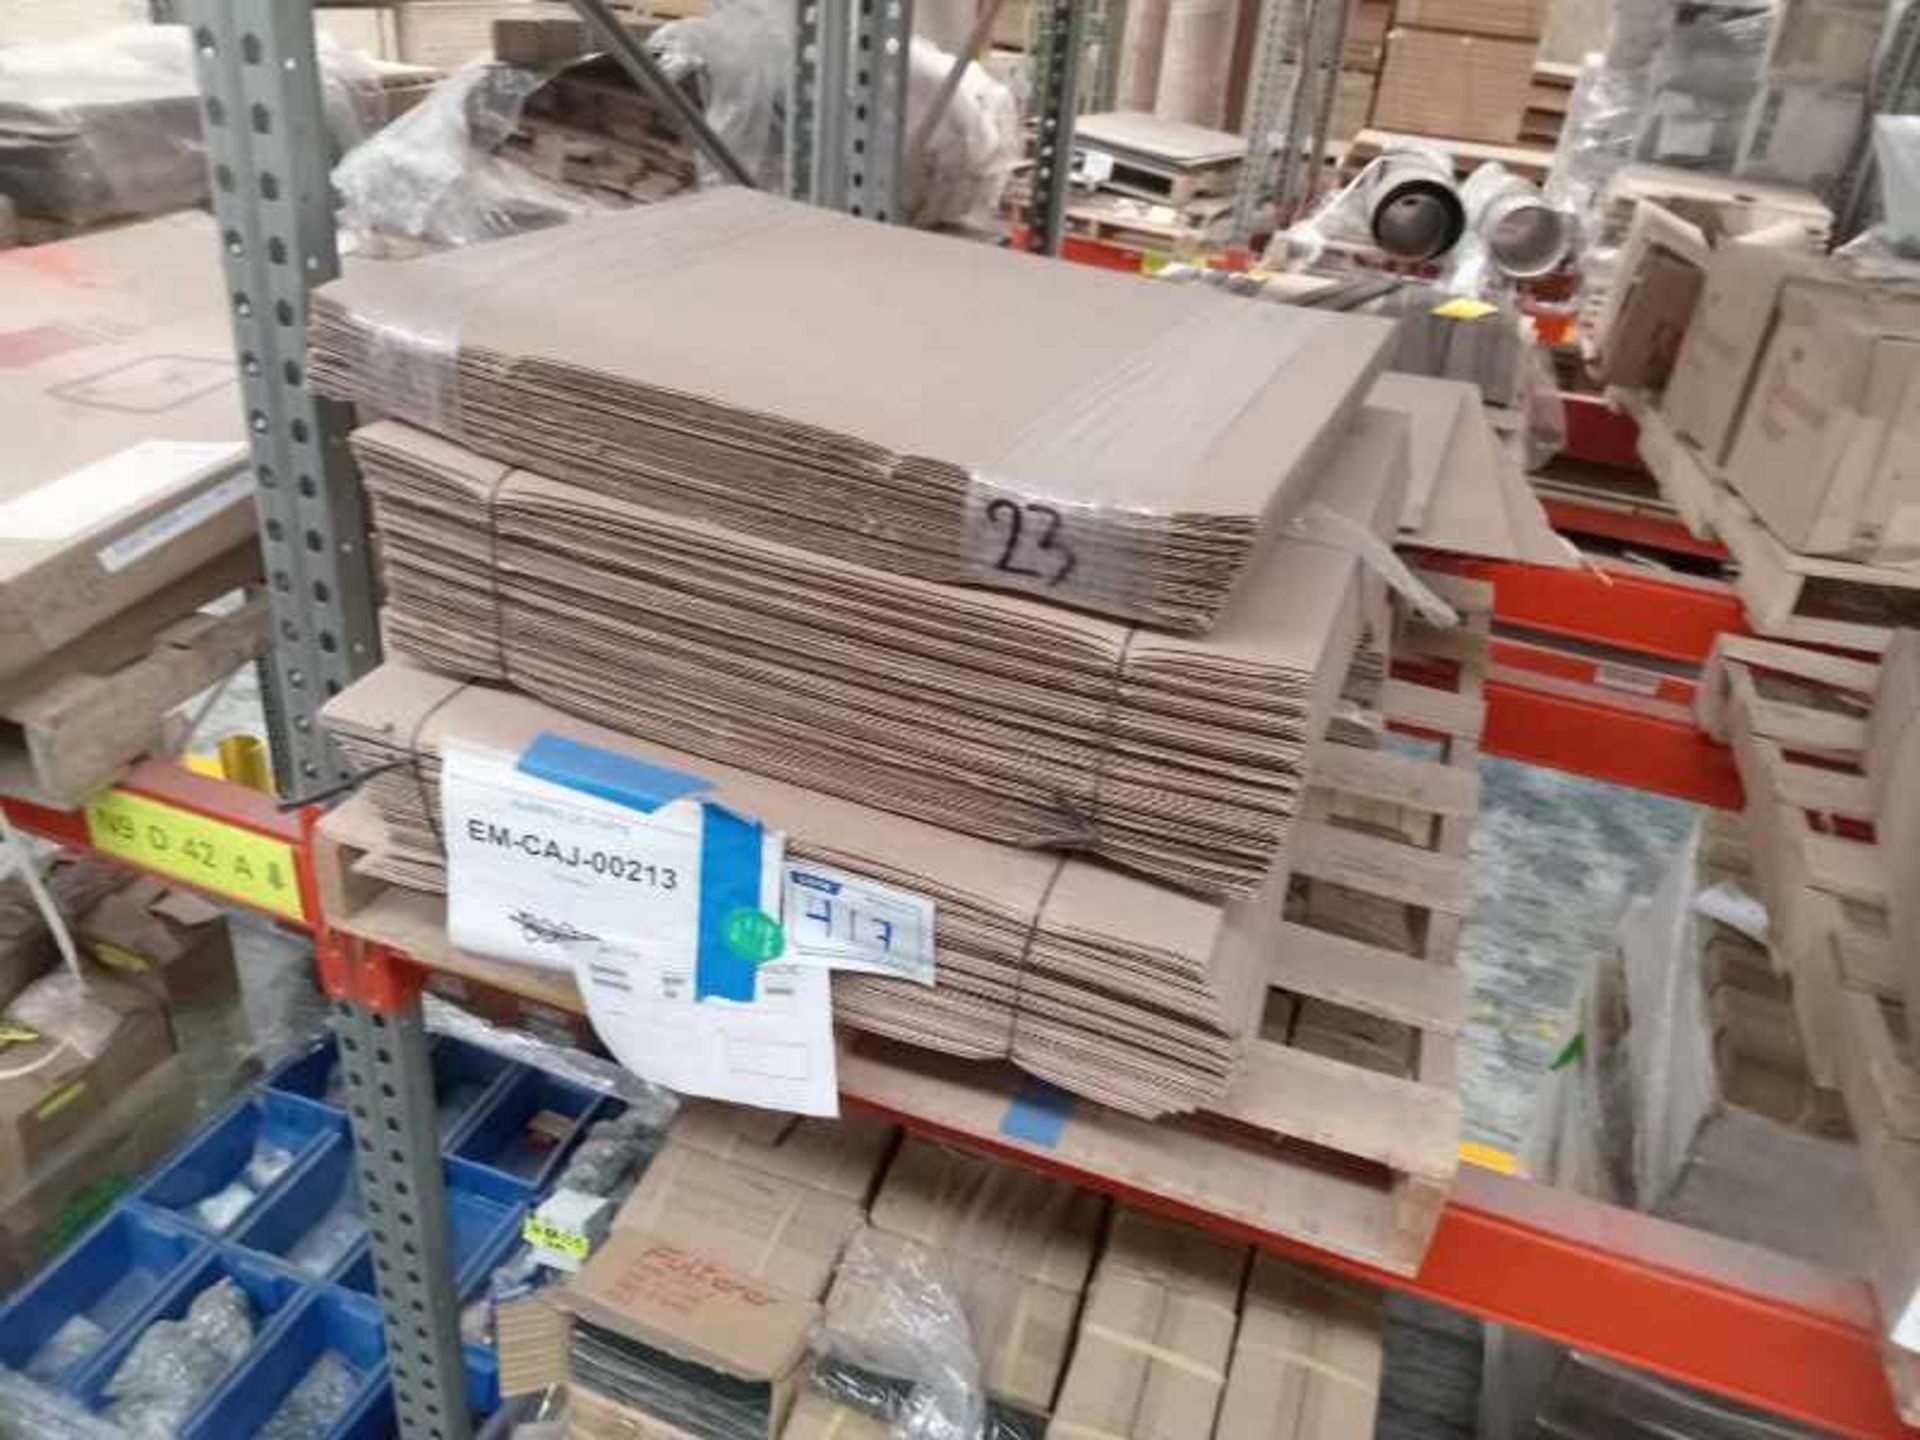 LOT OF APPROXIMATELY (83,310) PCS OF CARDBOARD BOXES AND ACCESSORIES - Image 35 of 119